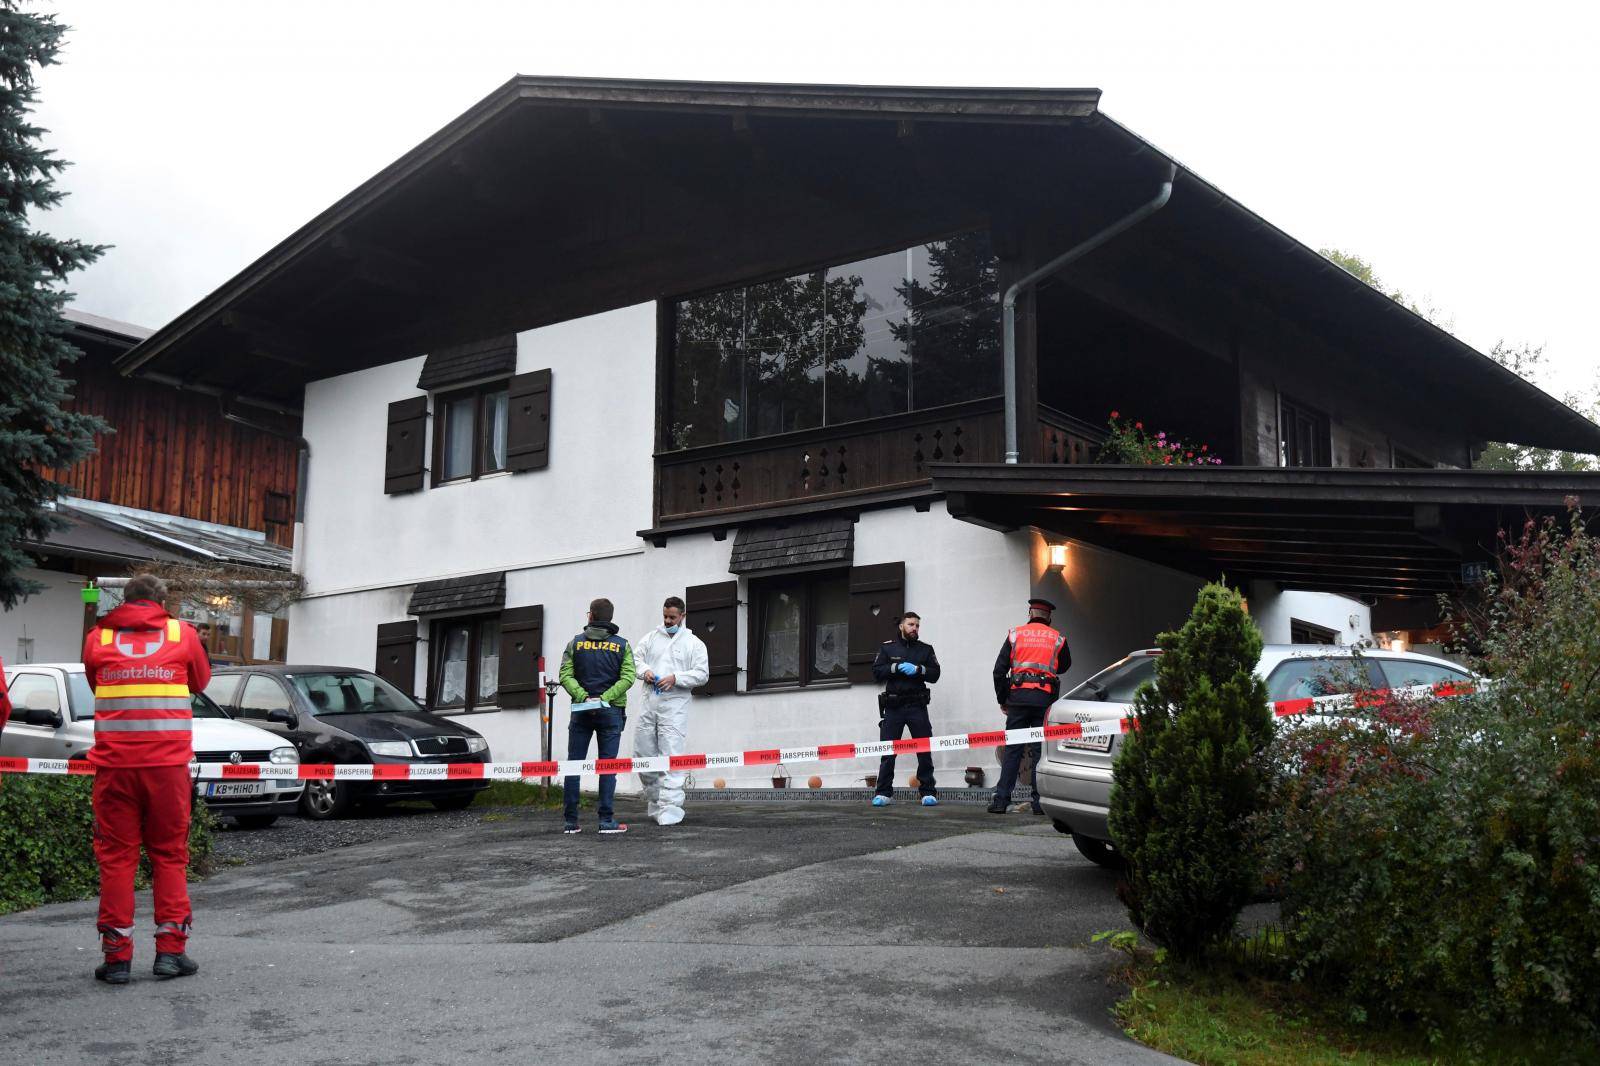 Police officers and rescue workers stand in front of a house where, according to police, five people were found dead in Kitzbuehel